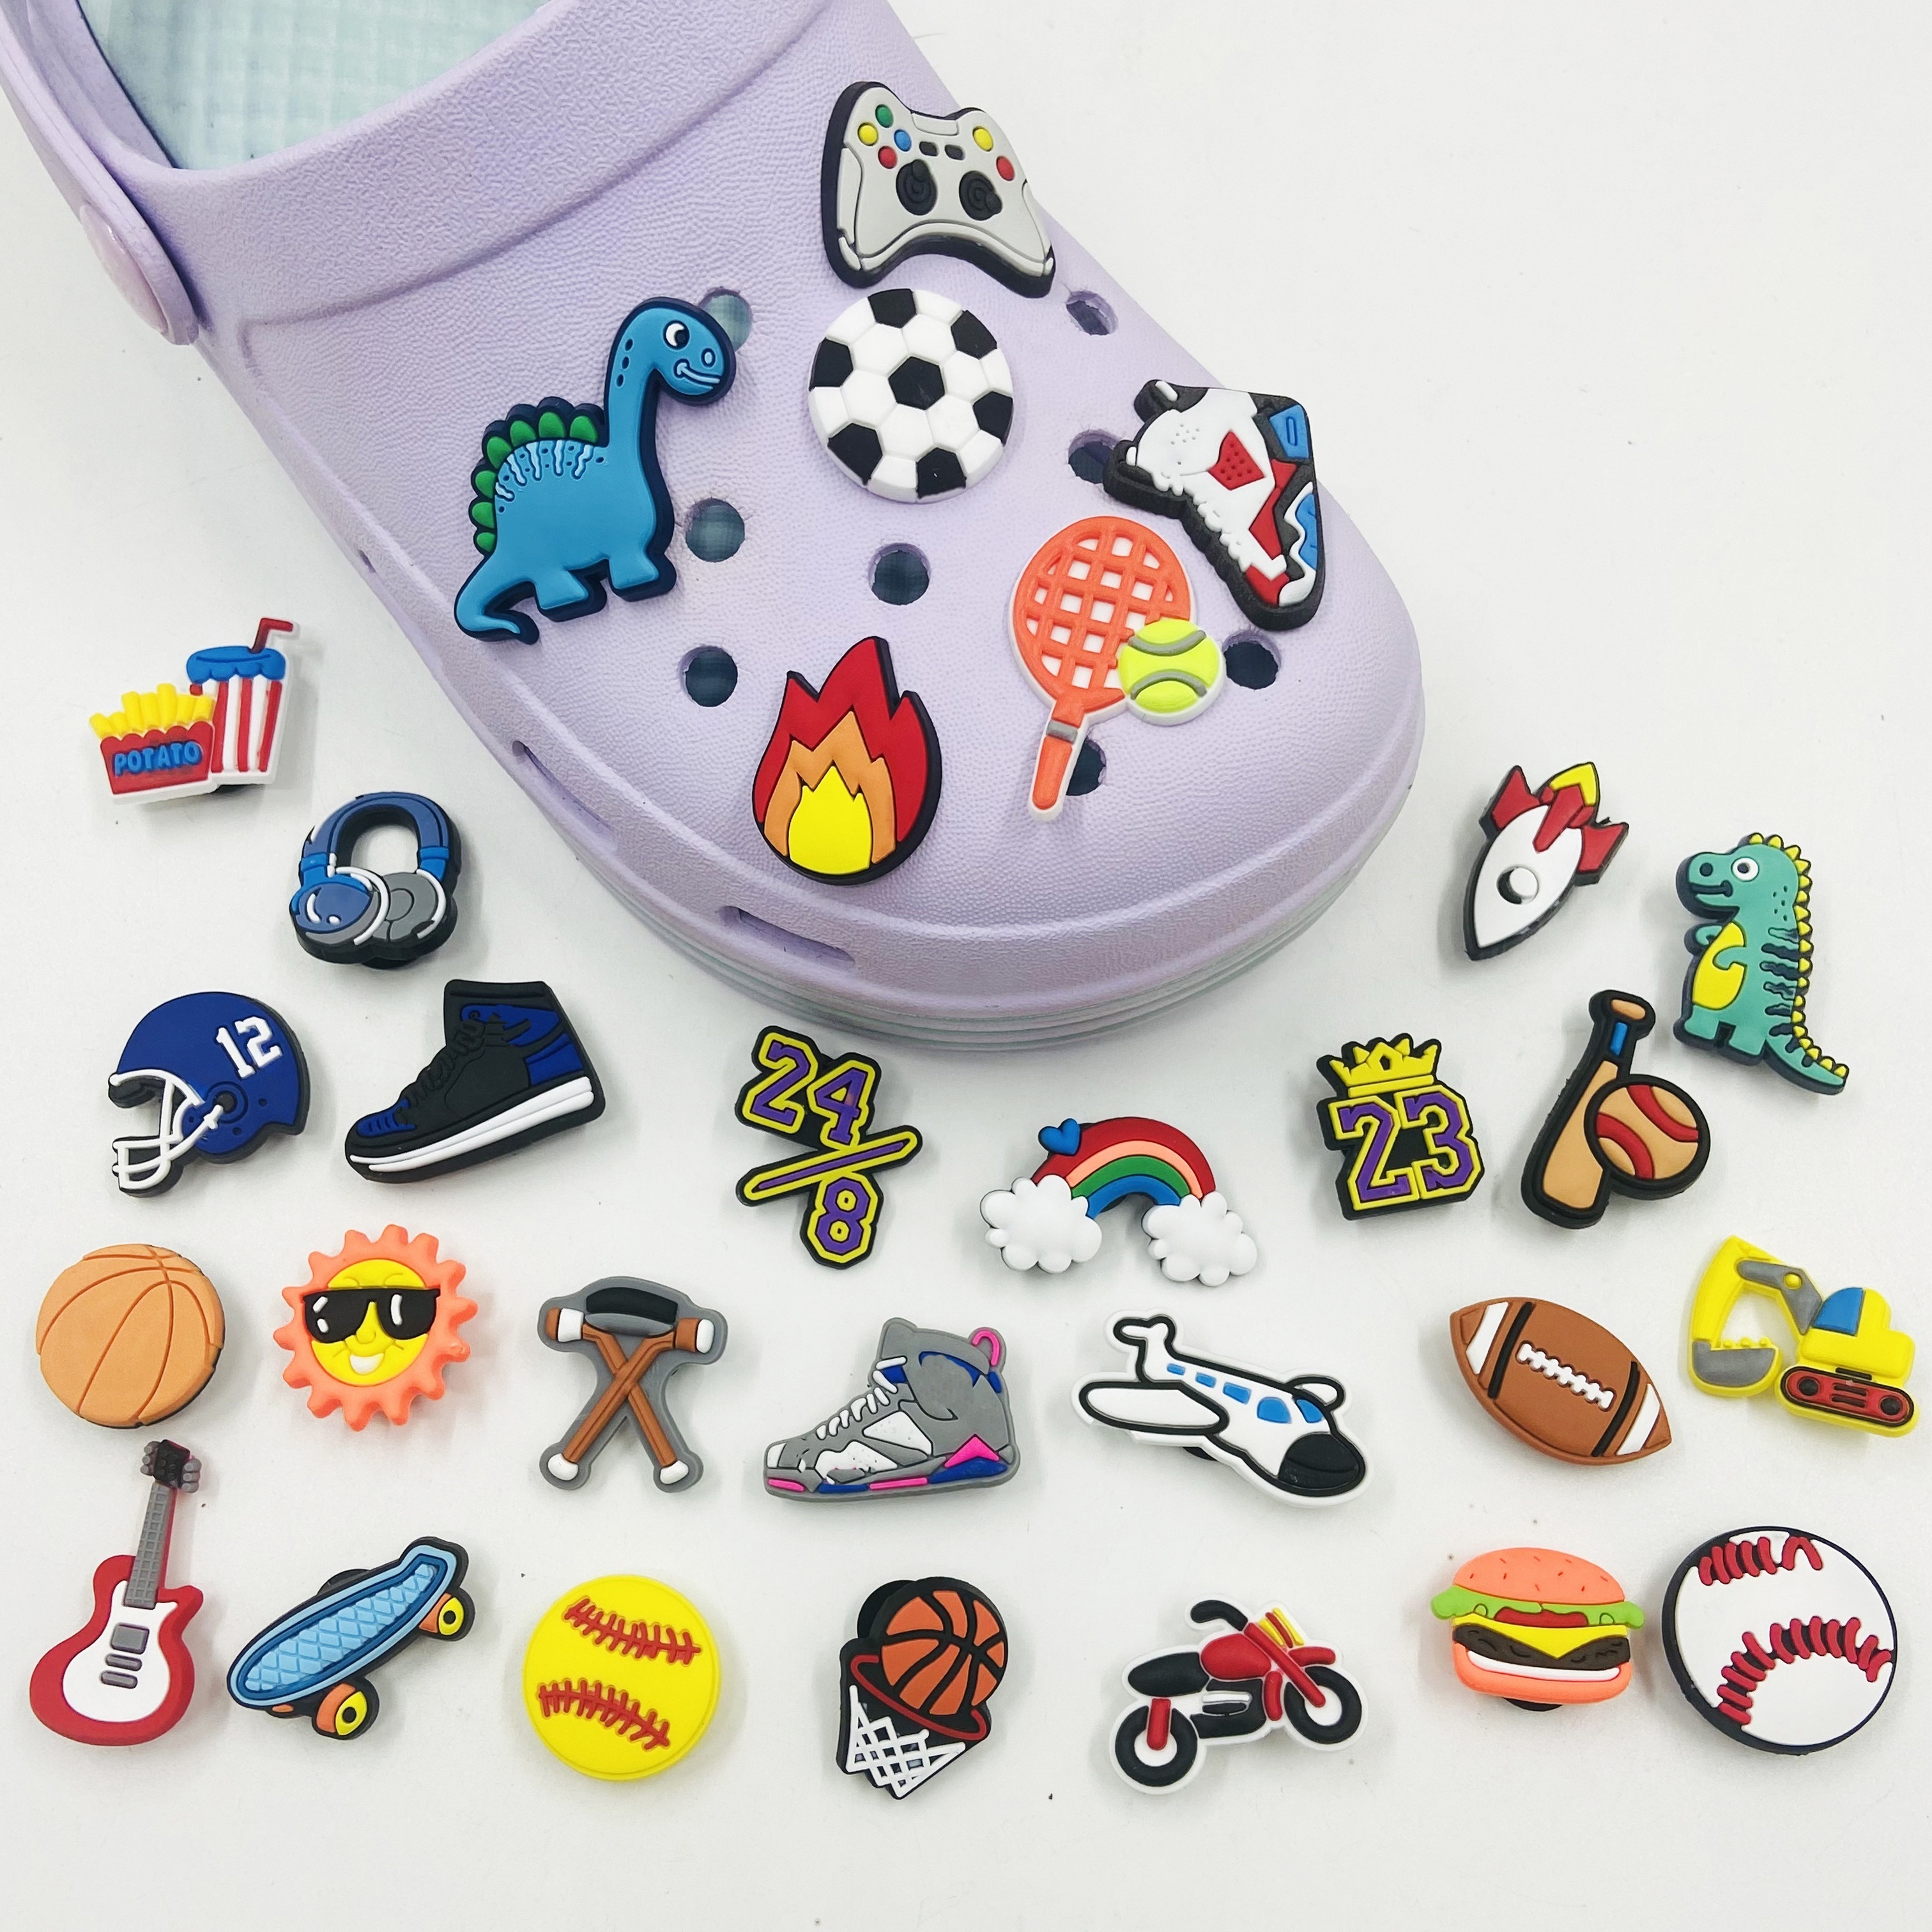 Croc Charms Fishing Camping Hunting Outdoor Cap Unisex Kids Shoes Croc  Charms Softball Bff Aesthetic Cute Funny